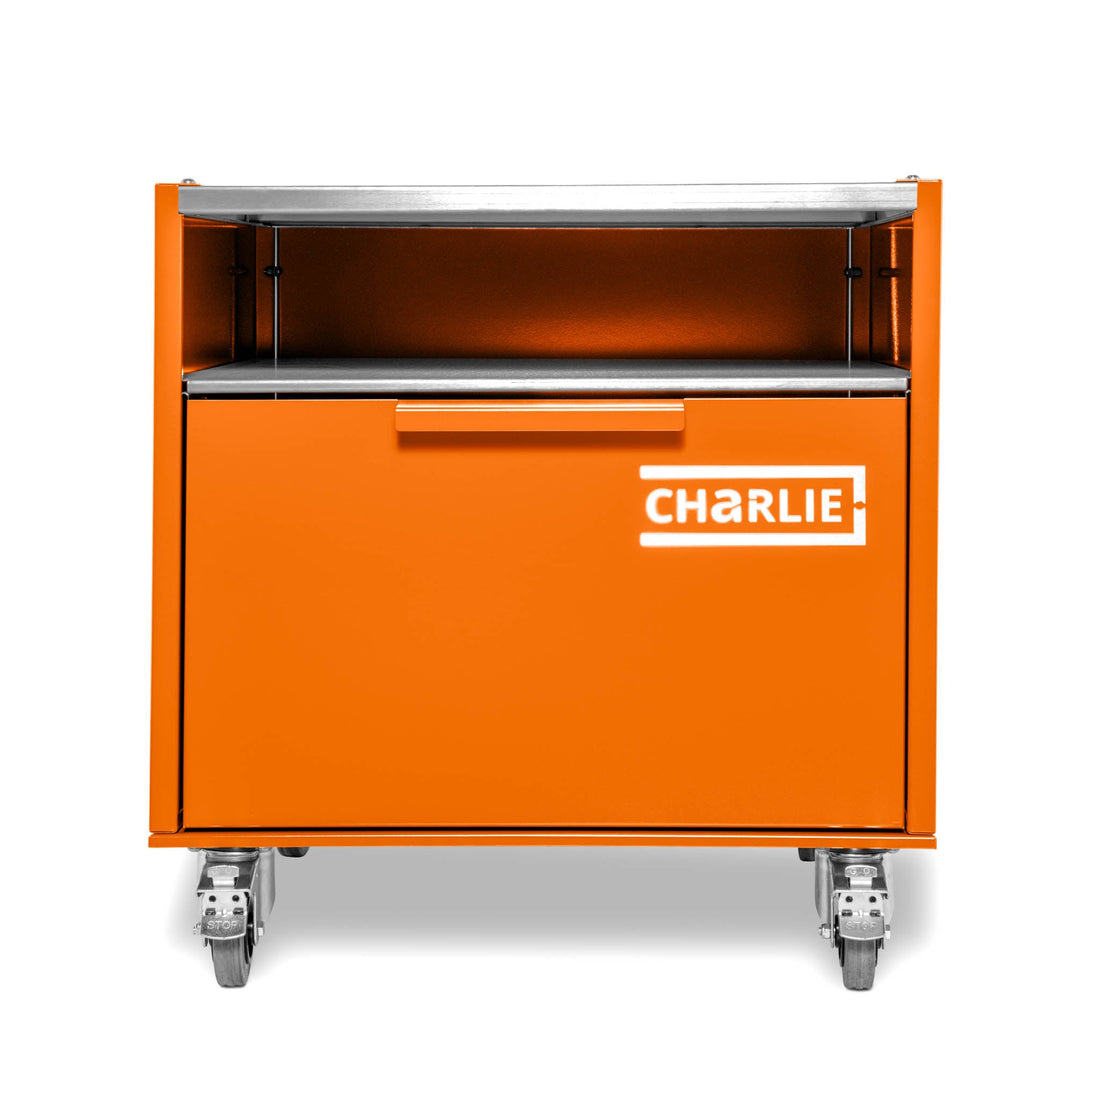 Cheeky Charlie Oven Base Cabinet - Charlie Oven